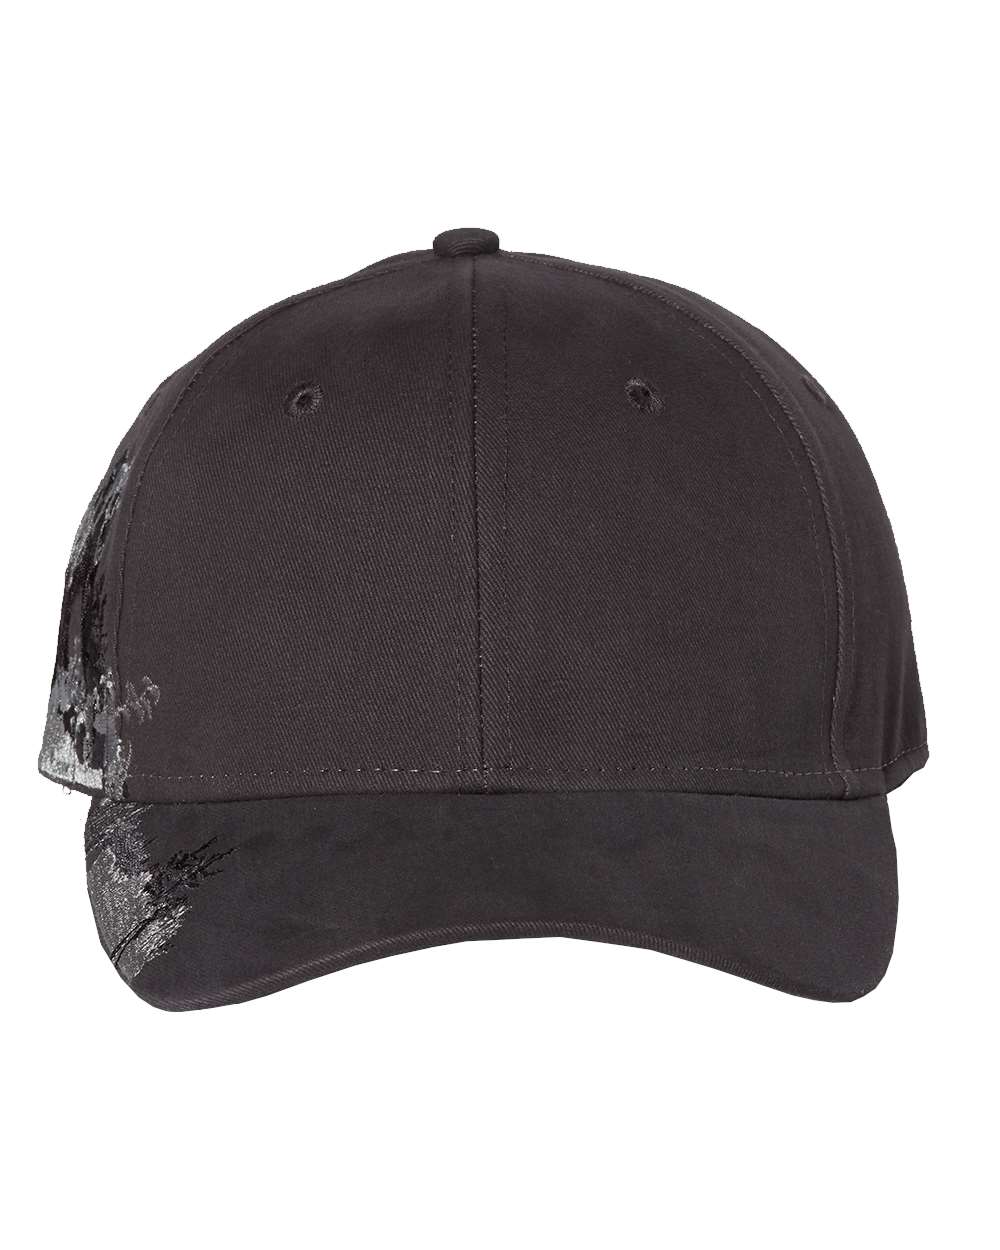 Grizzly Bear Cap - 3319-